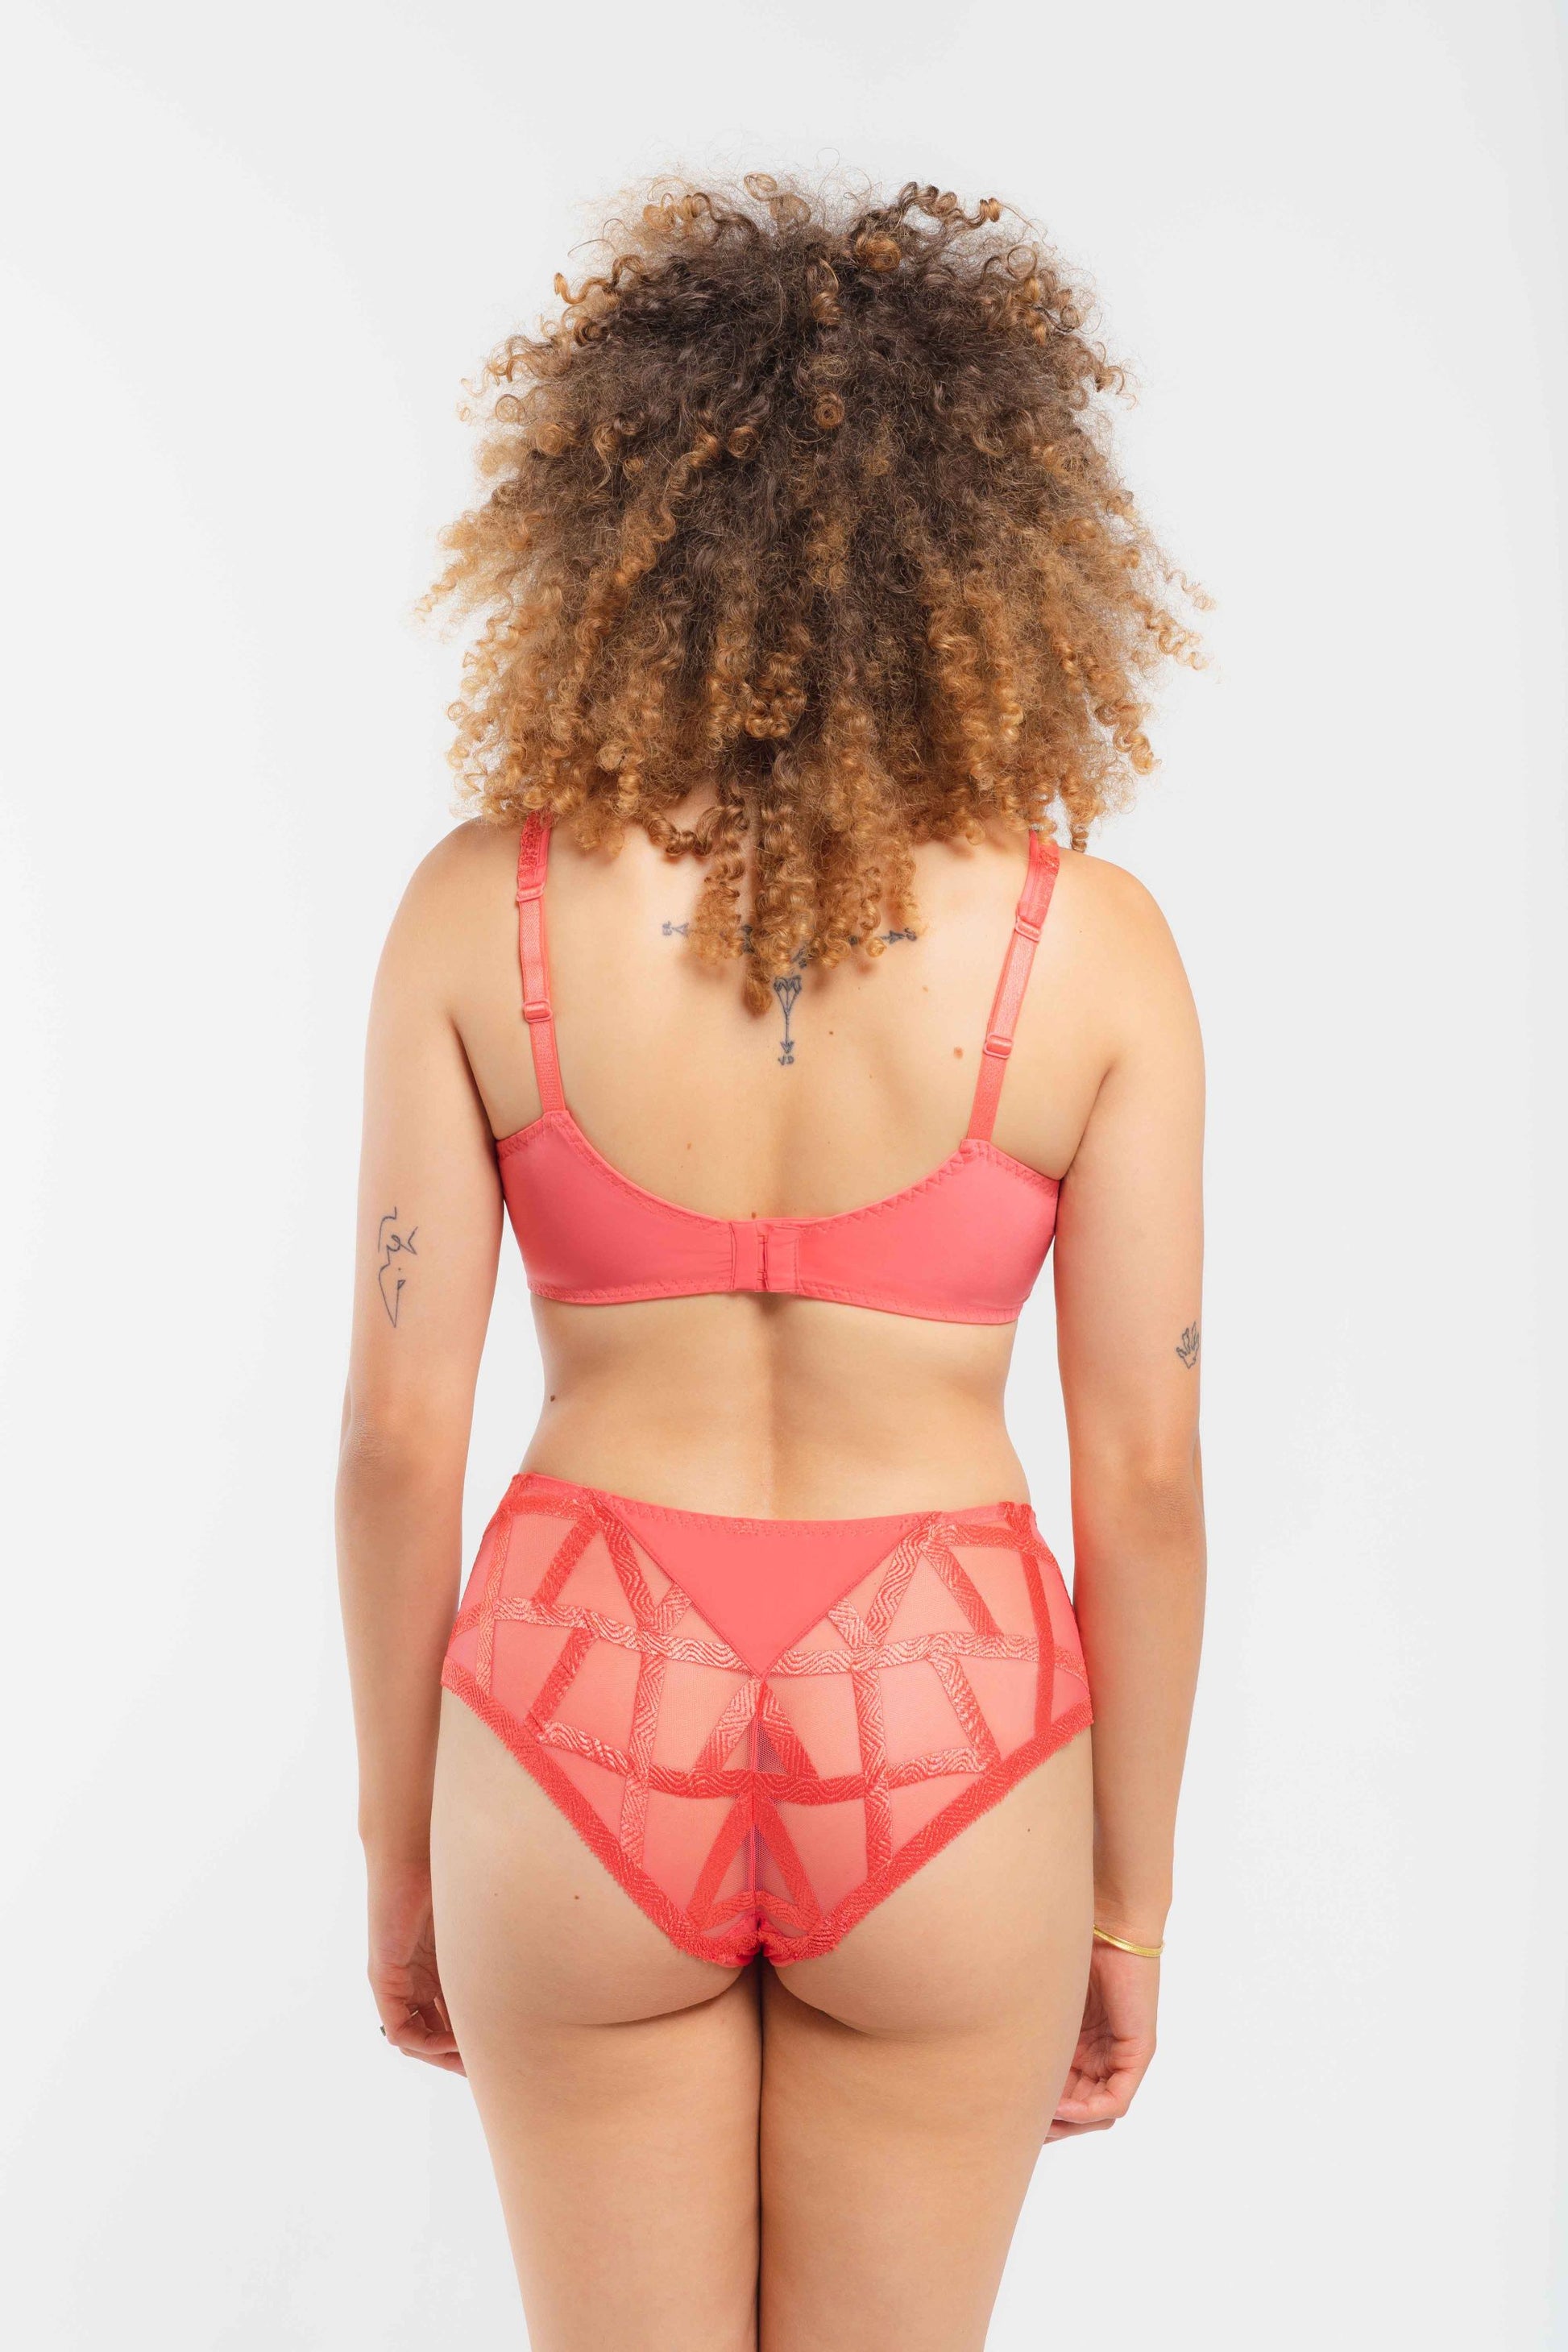 This piece from the Série range of Louisa Bracq features a fusion of geometric embroidery and semi-transparent tulle, which subtly showcases the wearer's skin for an alluring and stylish appearance. Its lightweight, soft and silky fabric ensure an ideal and comfortable fit for any size.